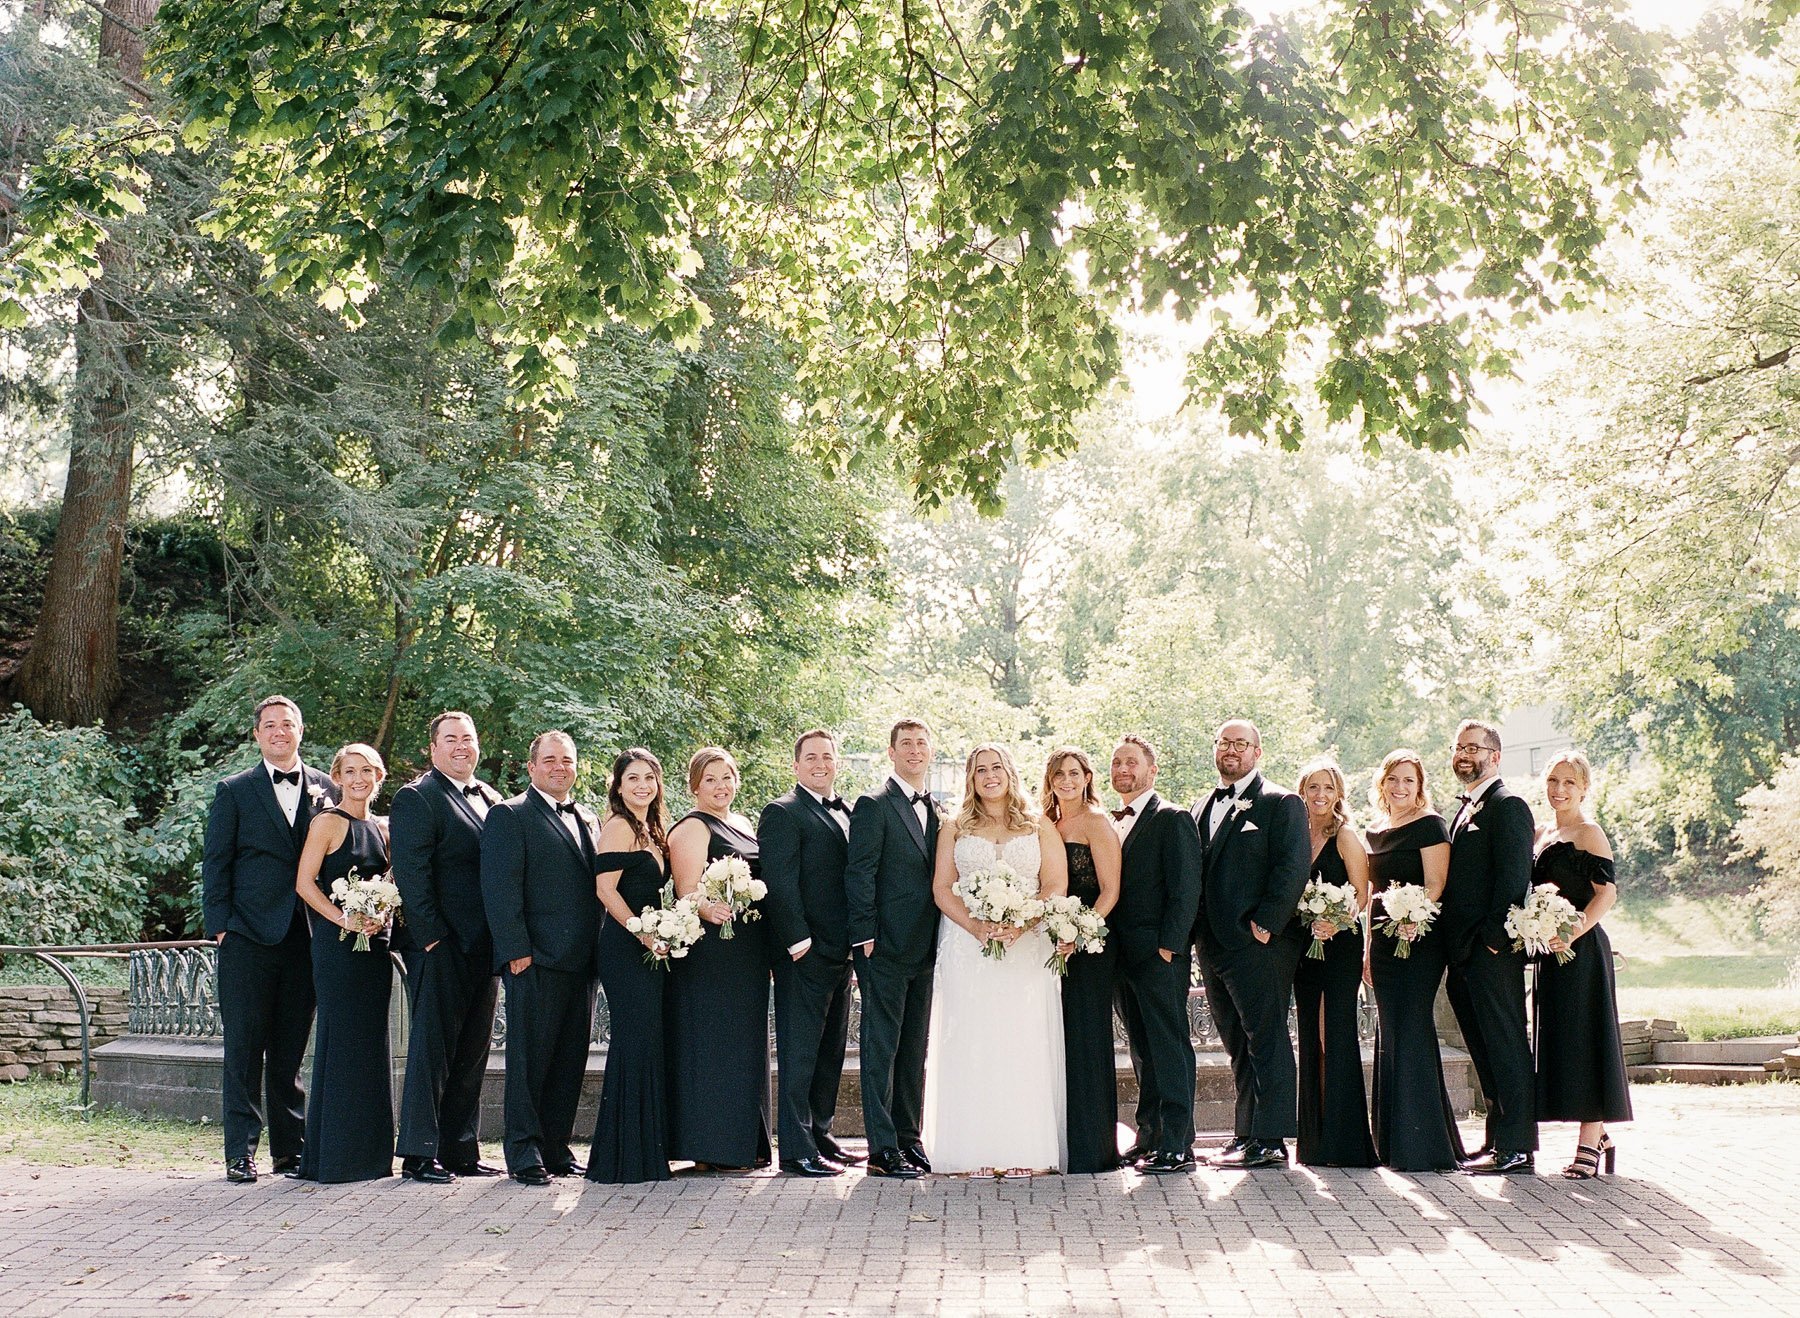 Saratoga National Golf Club Wedding with Kelly Strong Events  with bridesmaids dresses in black